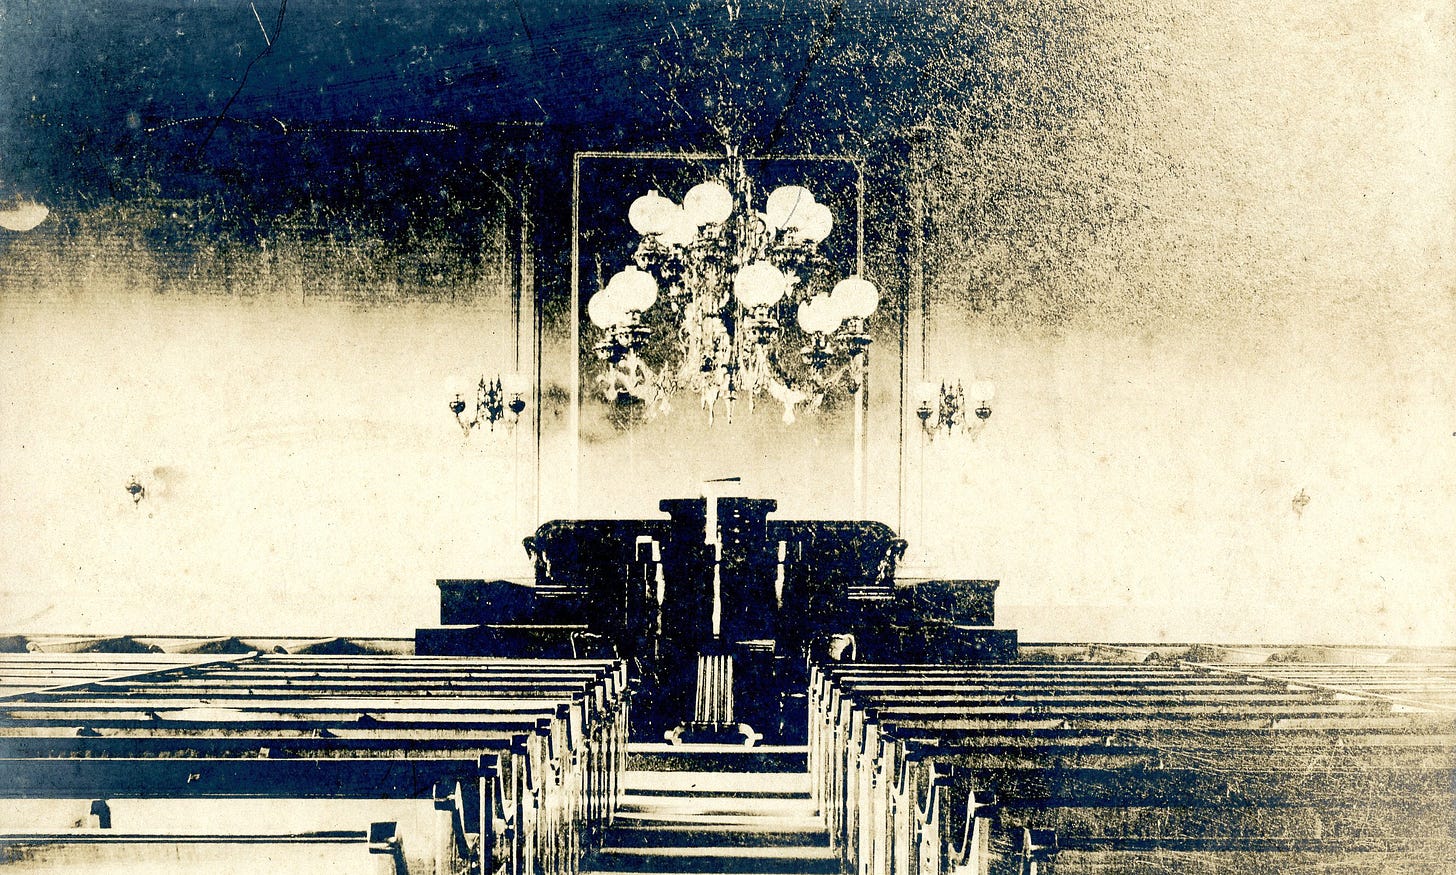 Pulpit and pews of a church